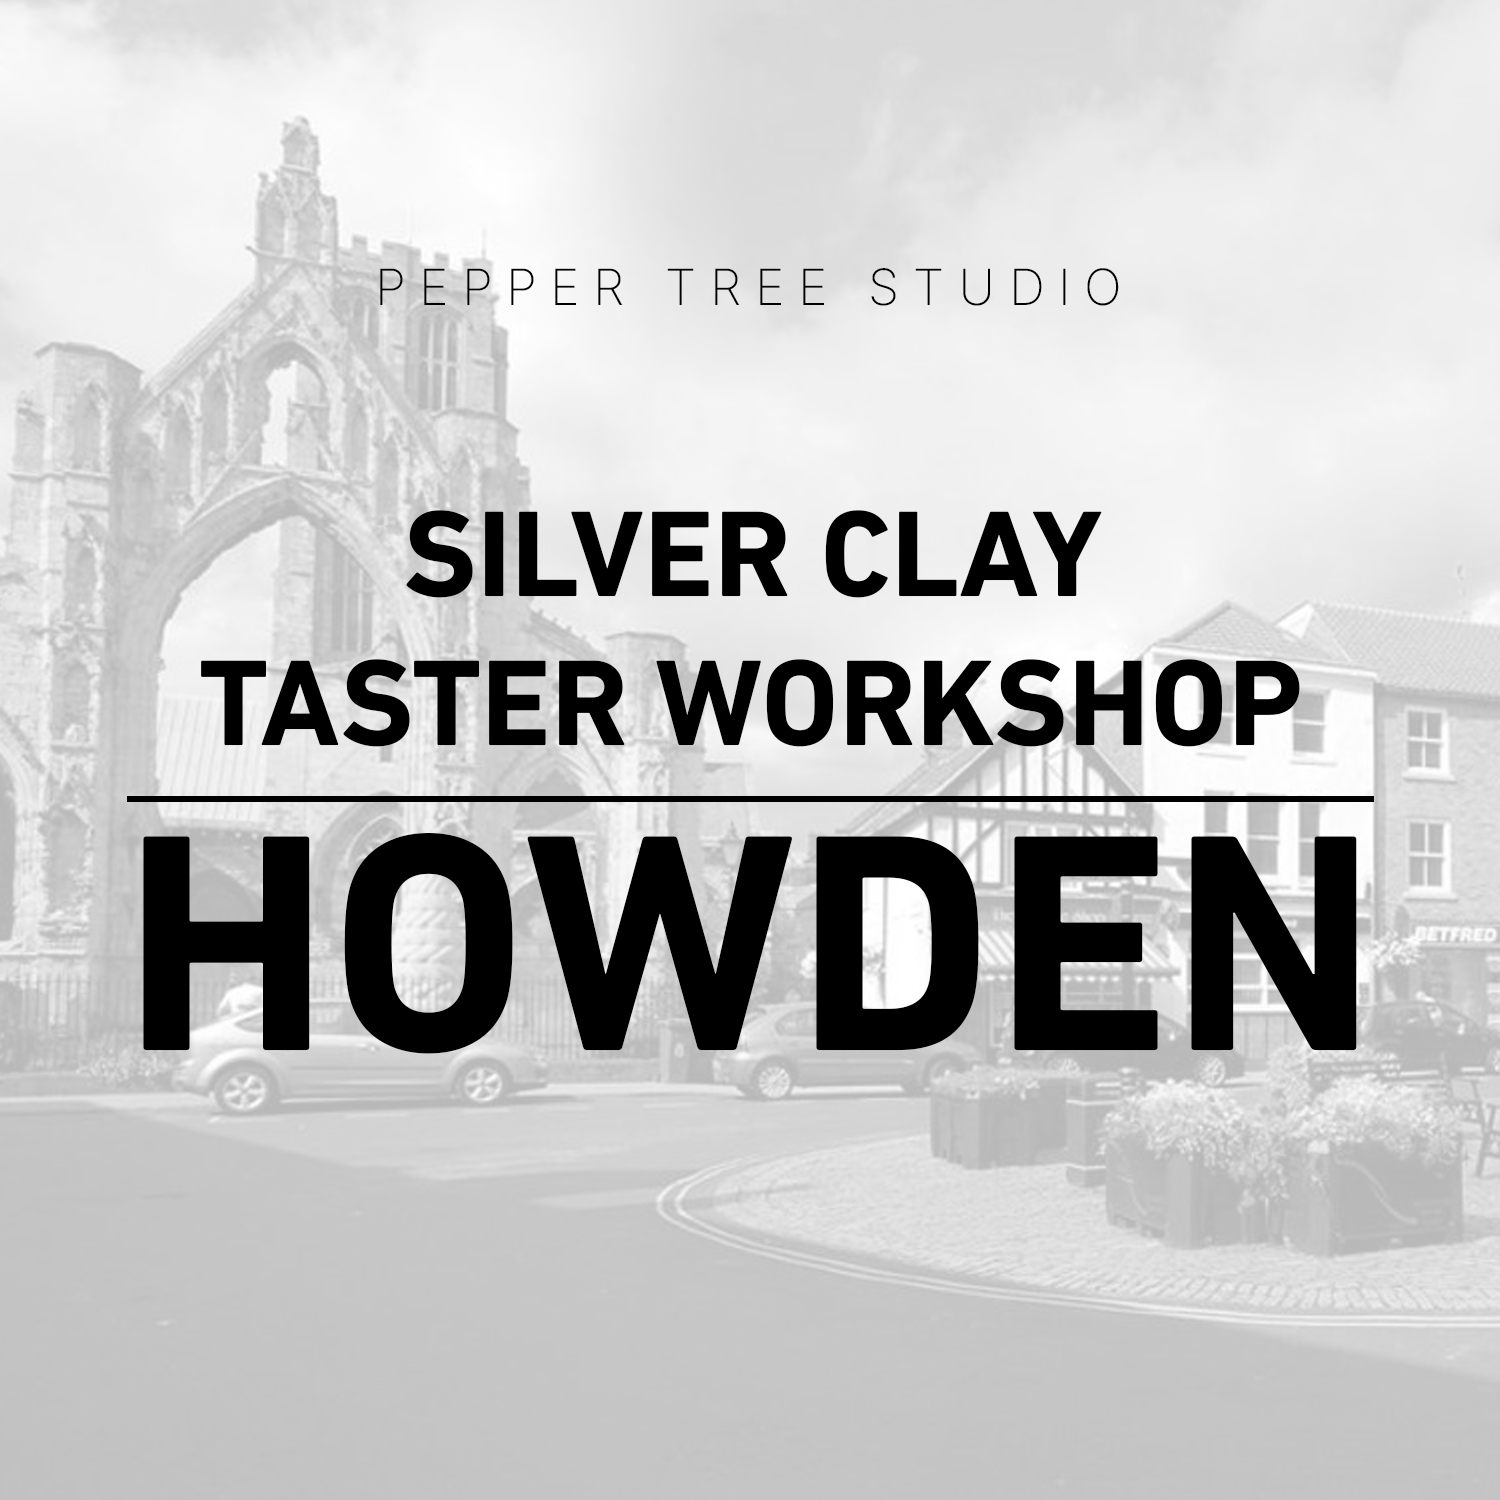 Image of Howden Silver Clay Taster Workshop